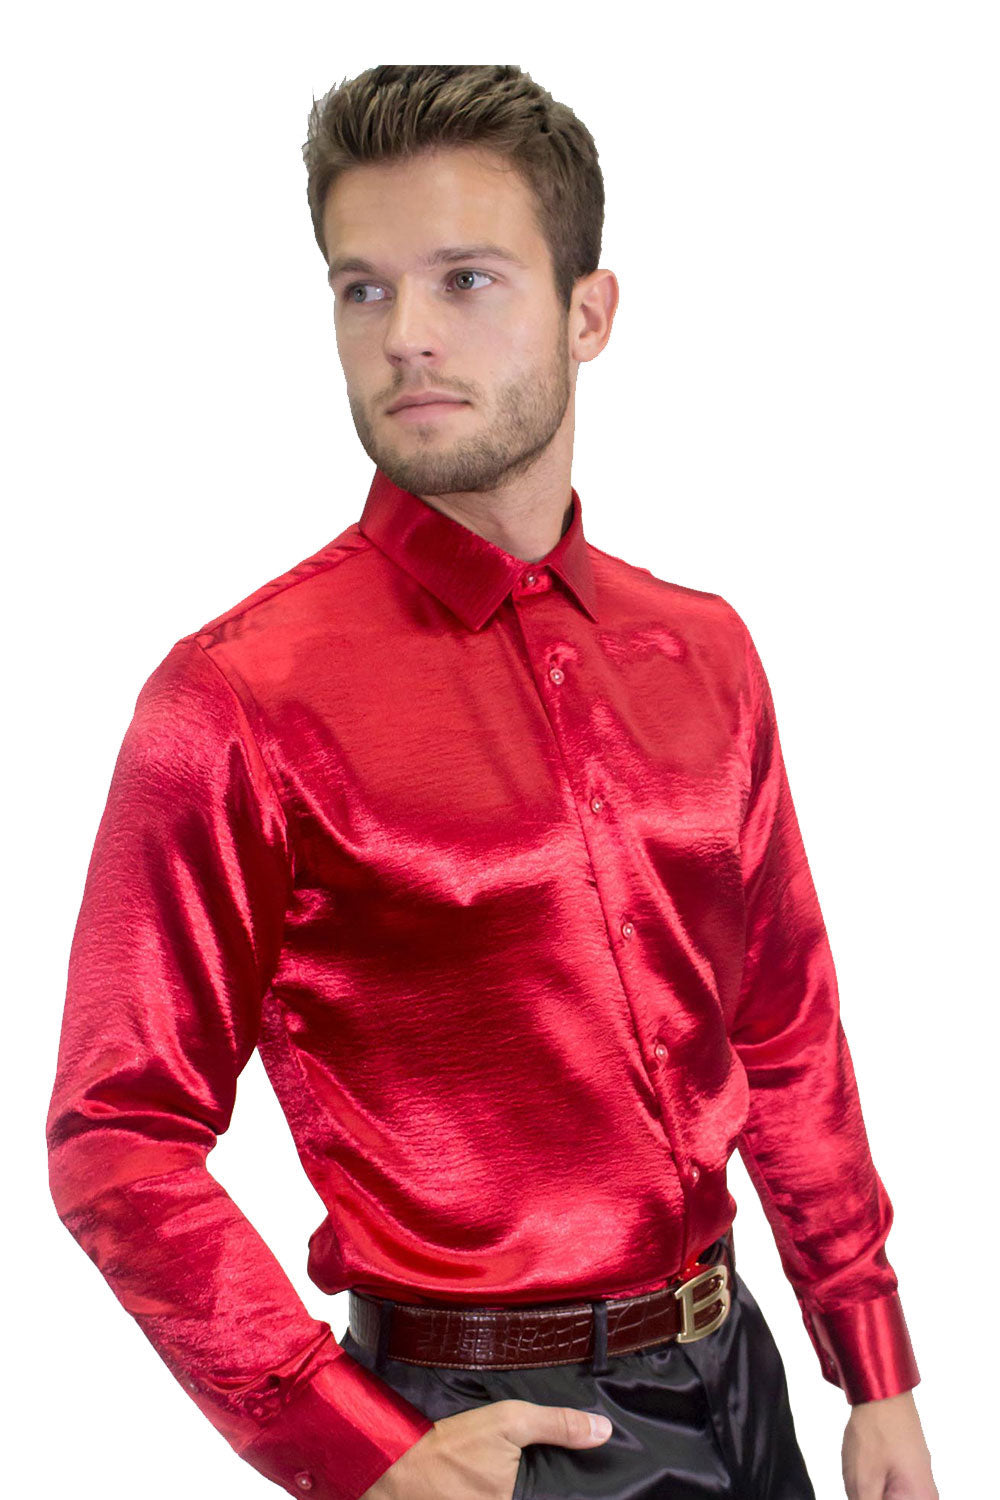 BARABAS Men shinny solid color button down dress Shirts B302 Red